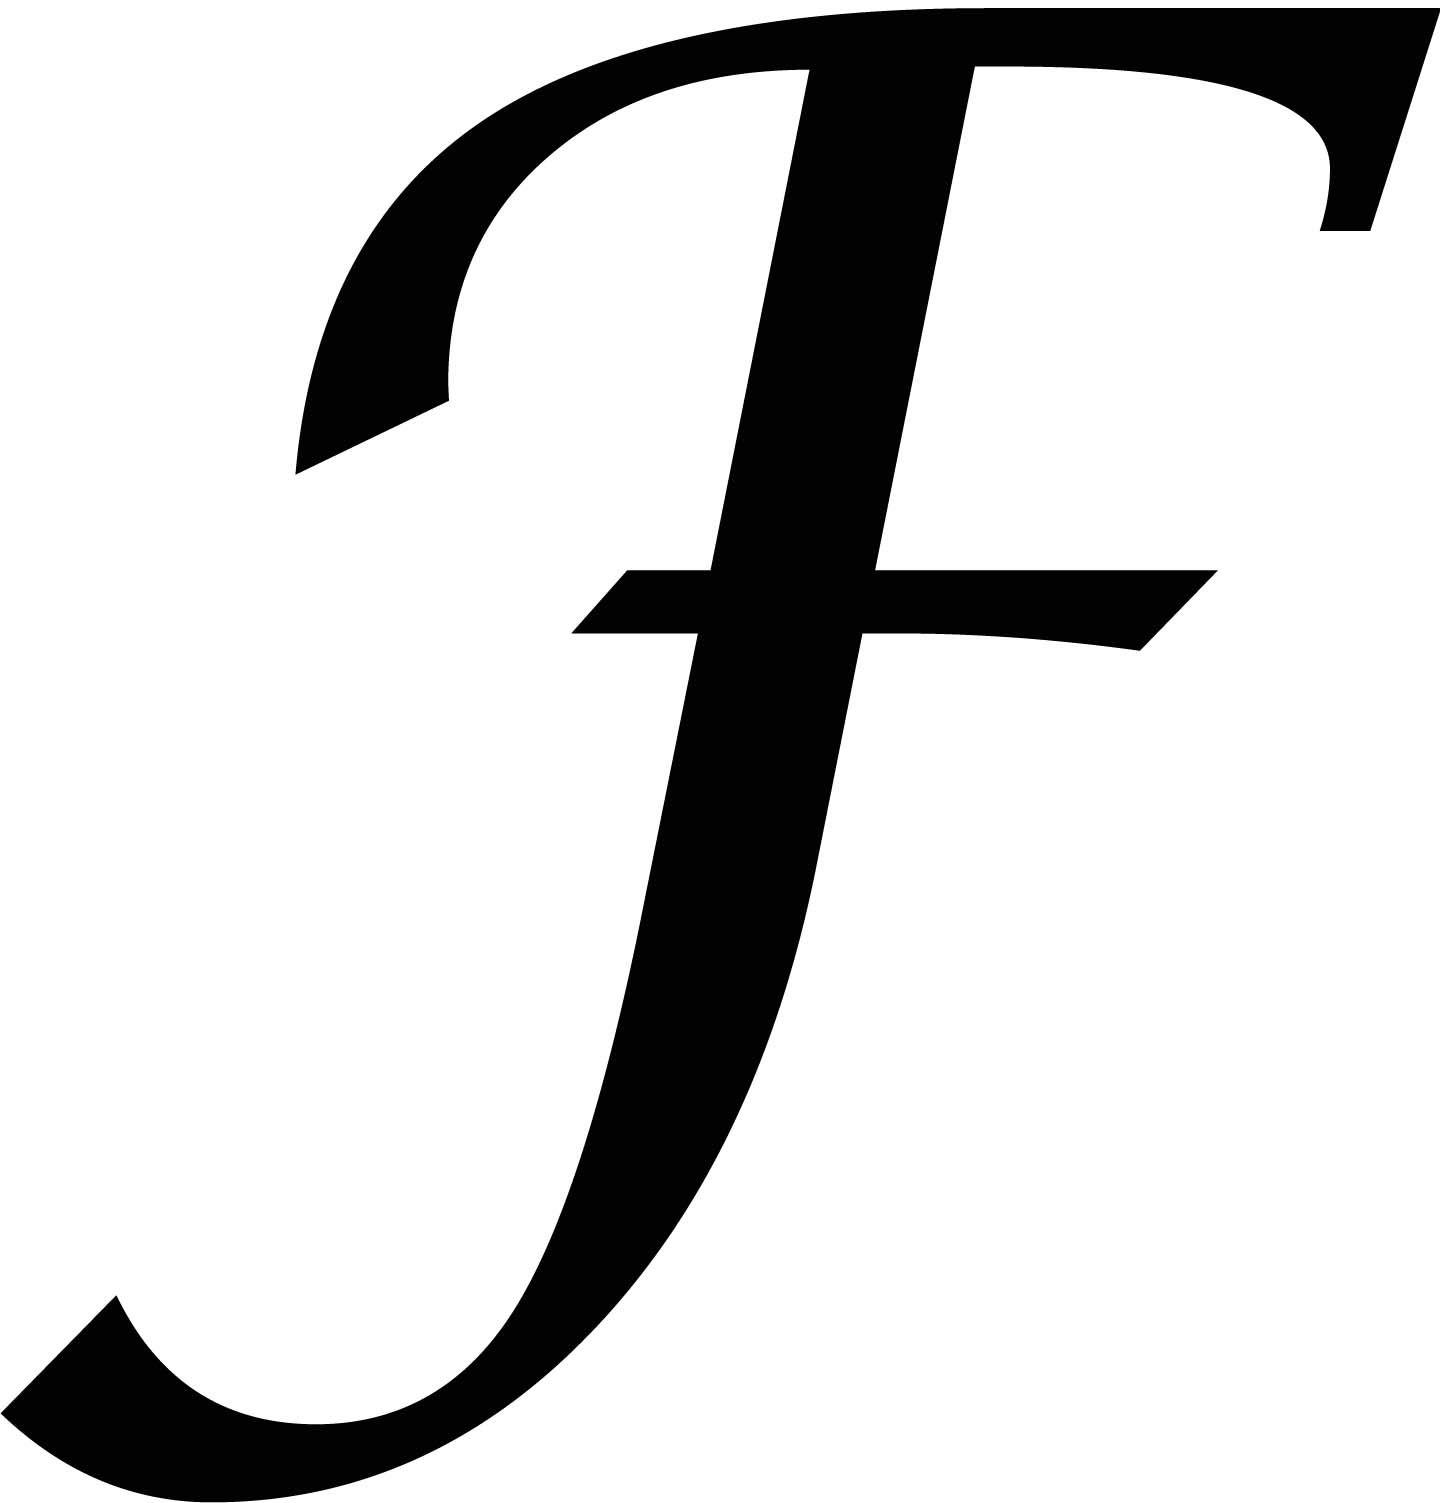 Fancy F Logo - F. created a Letter F Template and printed it out. If you want one